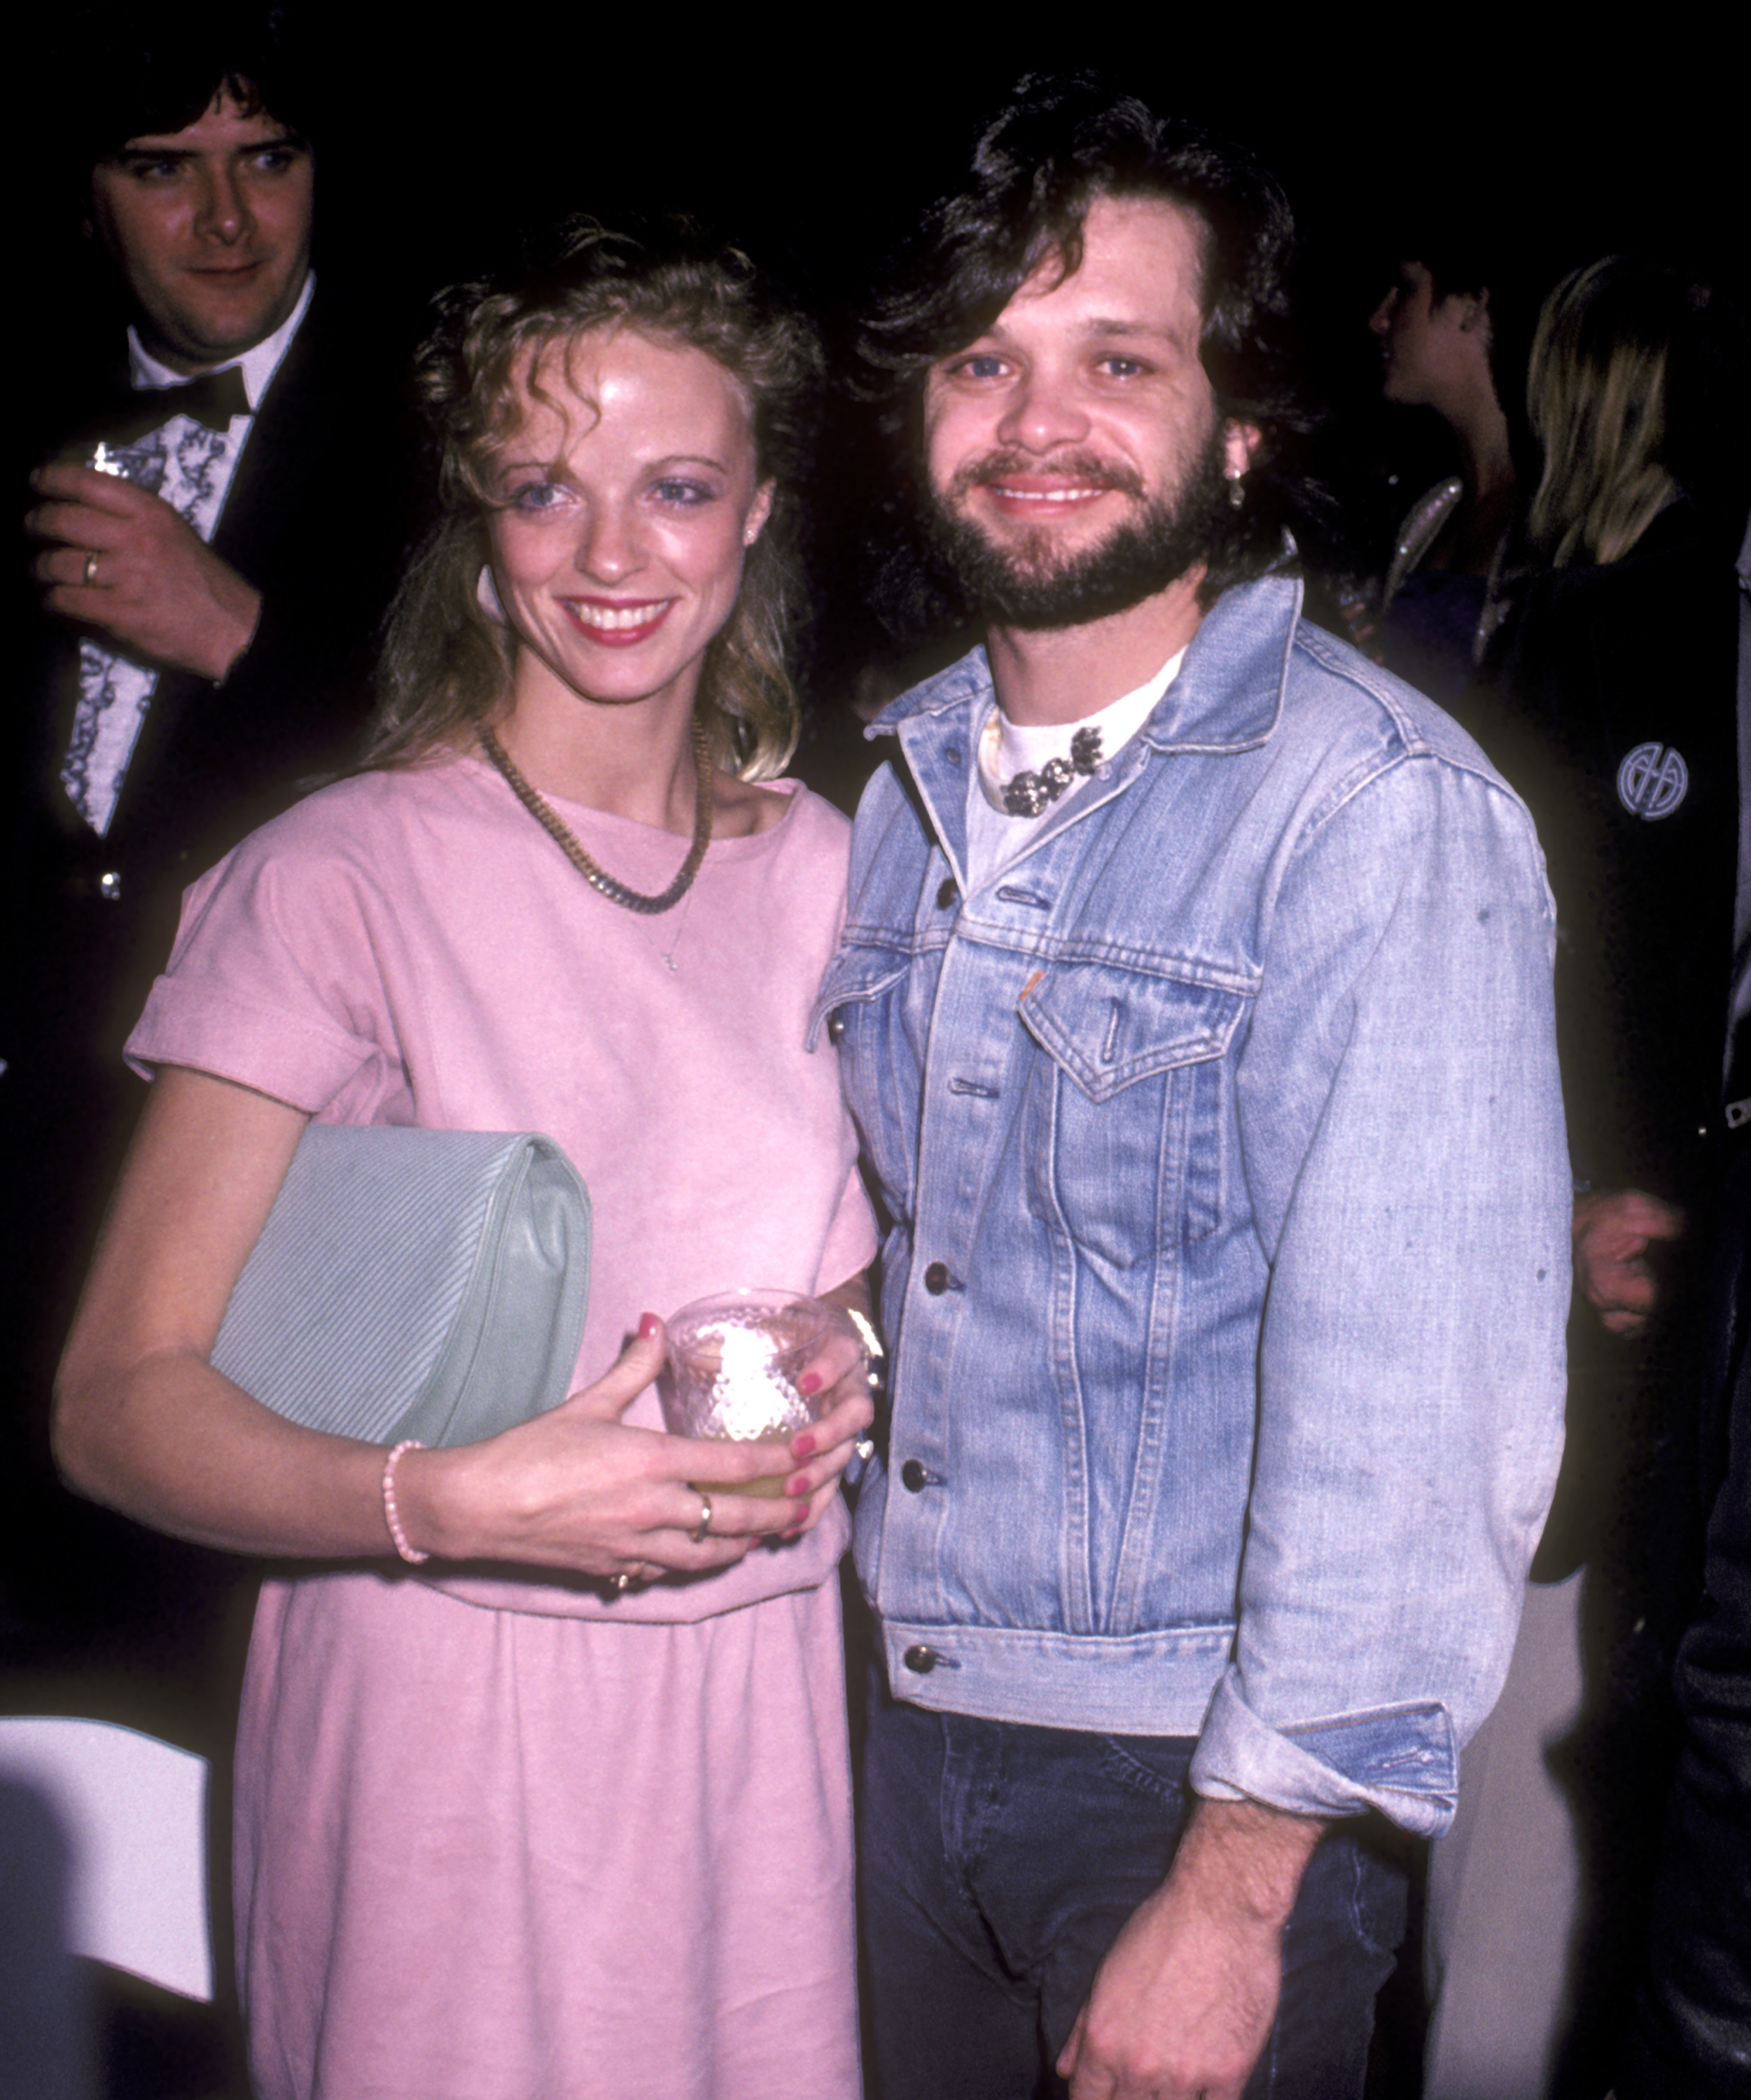 Vicky Granucci and John Mellencamp attend the 10th Annual American Music Awards on January 17, 1981 at Shrine Auditorium in Los Angeles, California. | Source: Getty Images